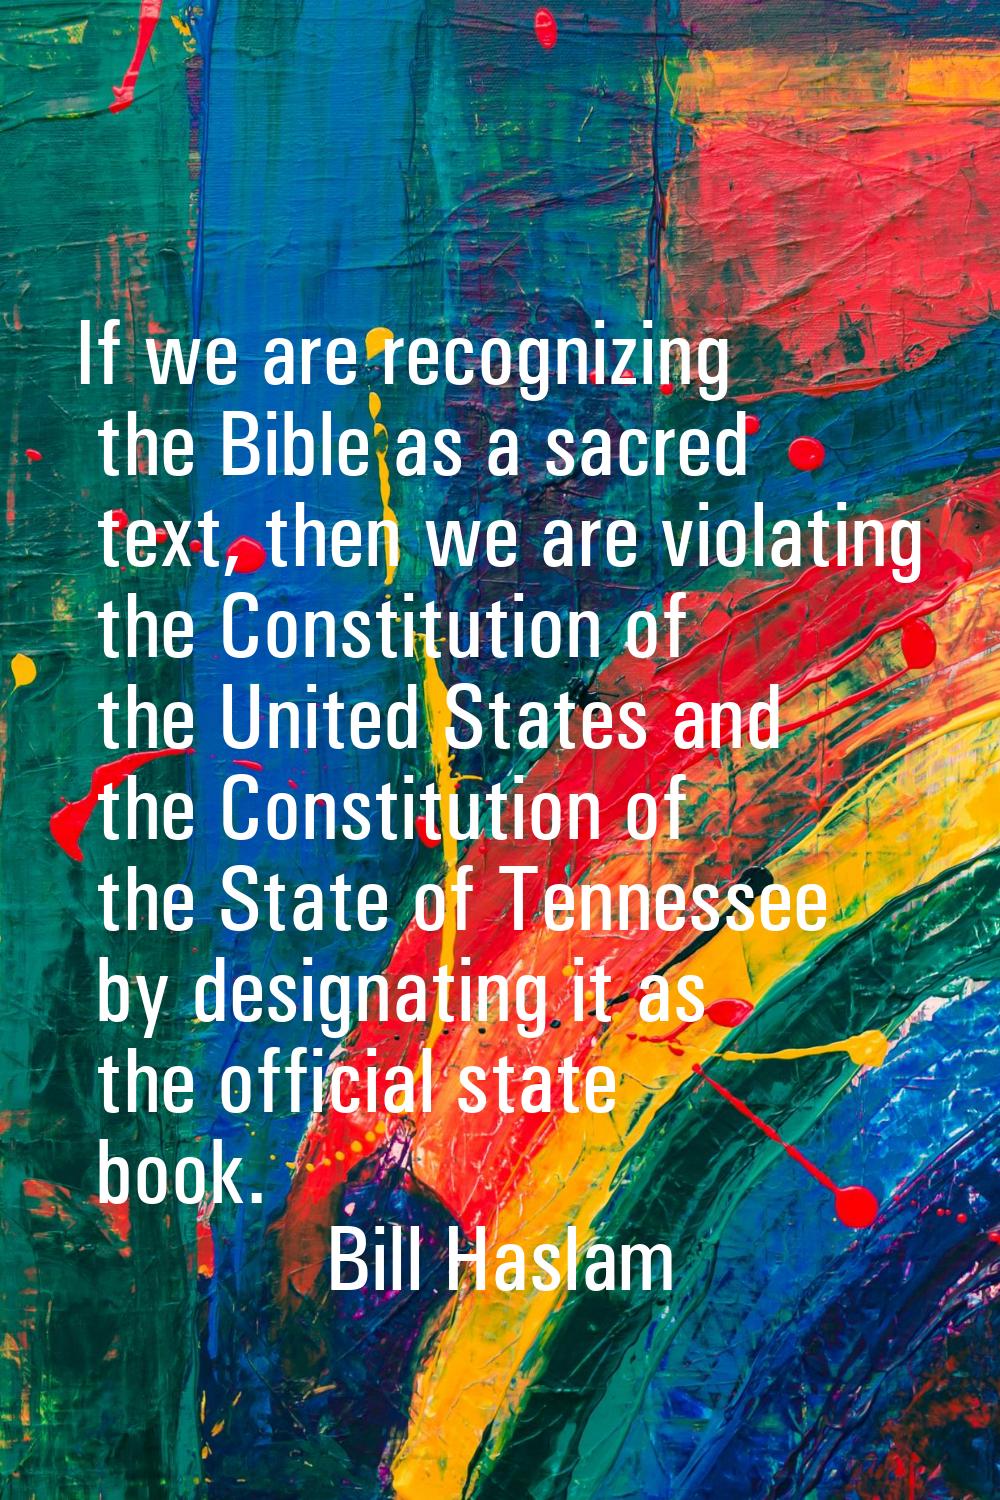 If we are recognizing the Bible as a sacred text, then we are violating the Constitution of the Uni